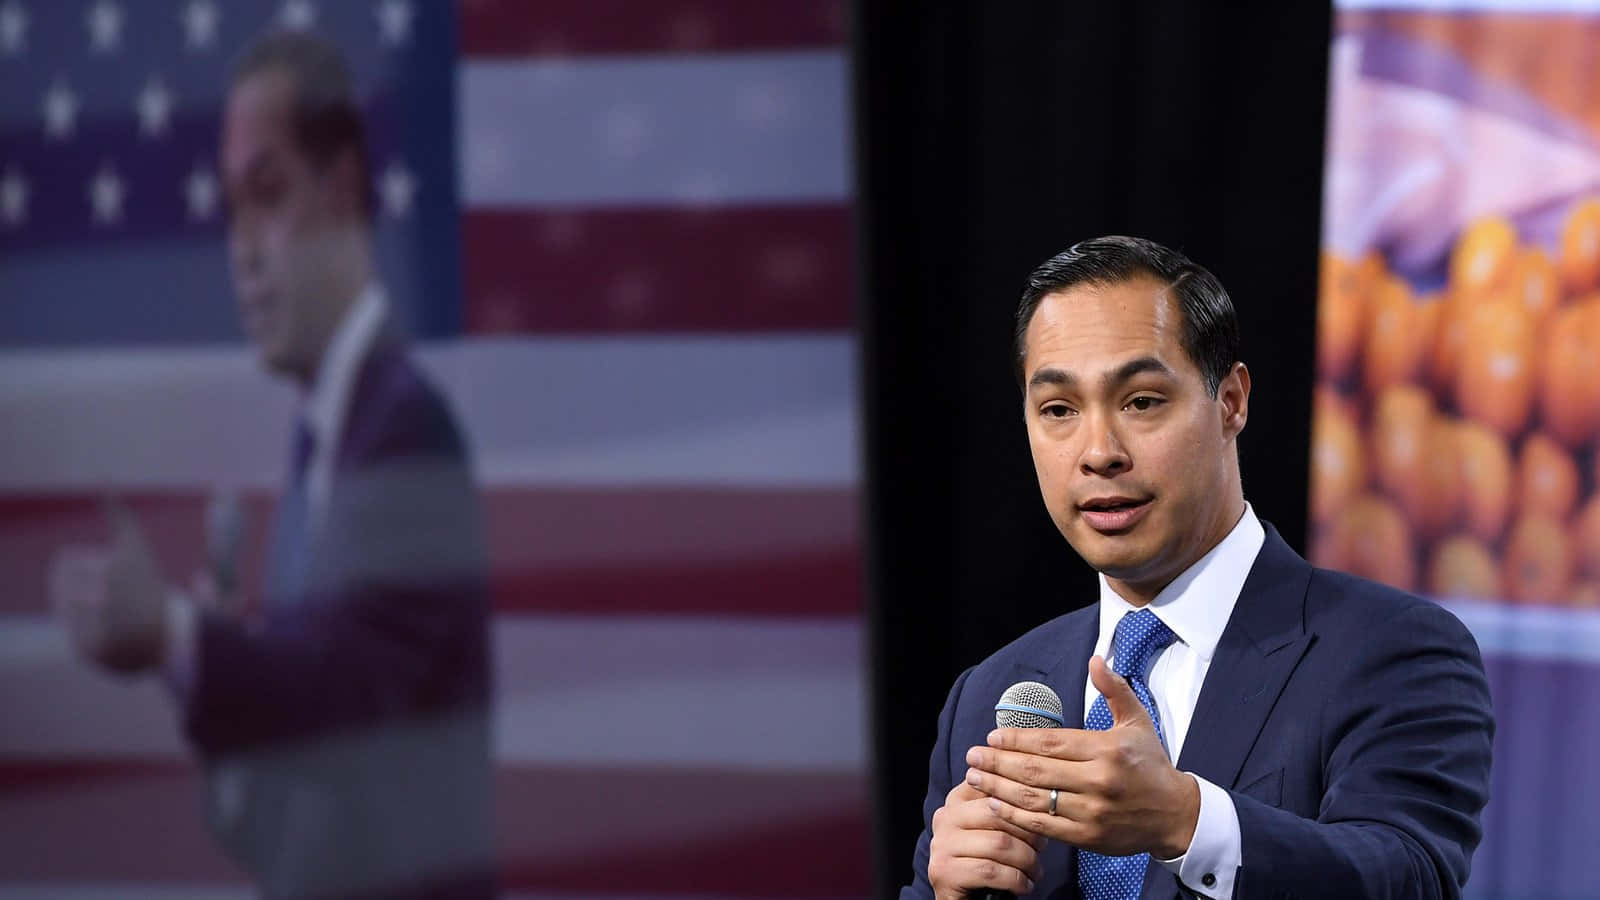 Julian Castro And His Reflection Wallpaper